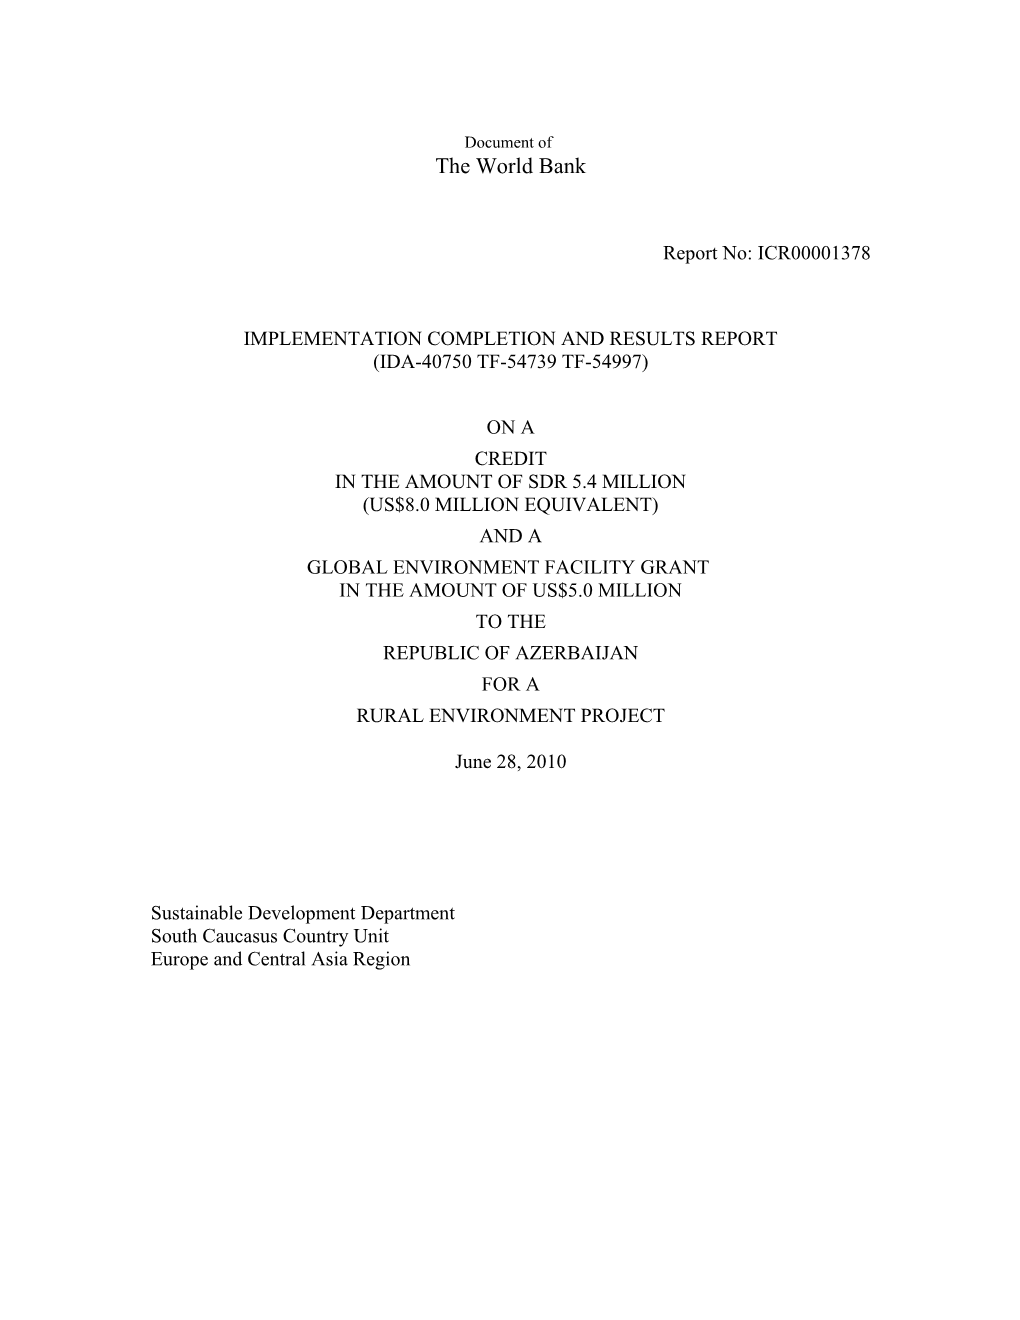 Document of the World Bank s2